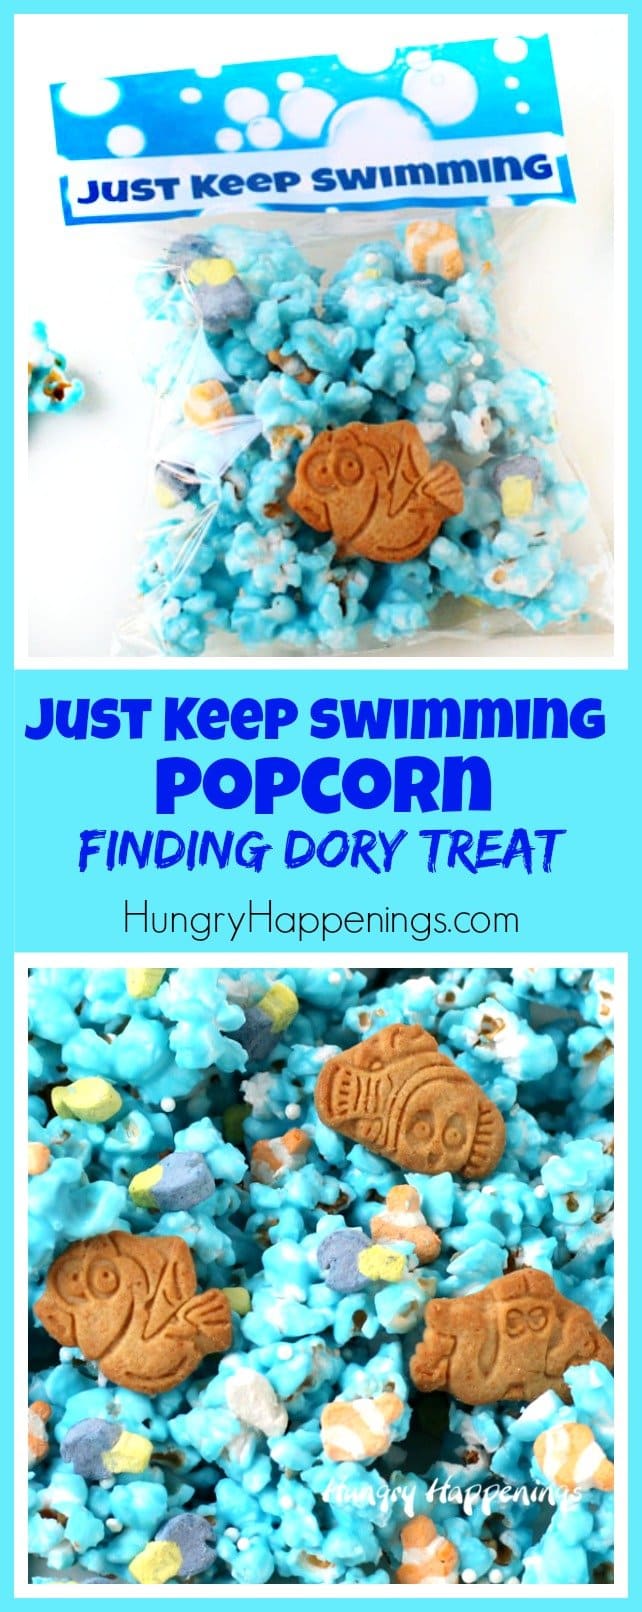 Package up some fun Finding Dory Treats to use as party favors. These "Just Keep Swimming Popcorn" bags are perfect party treats. 